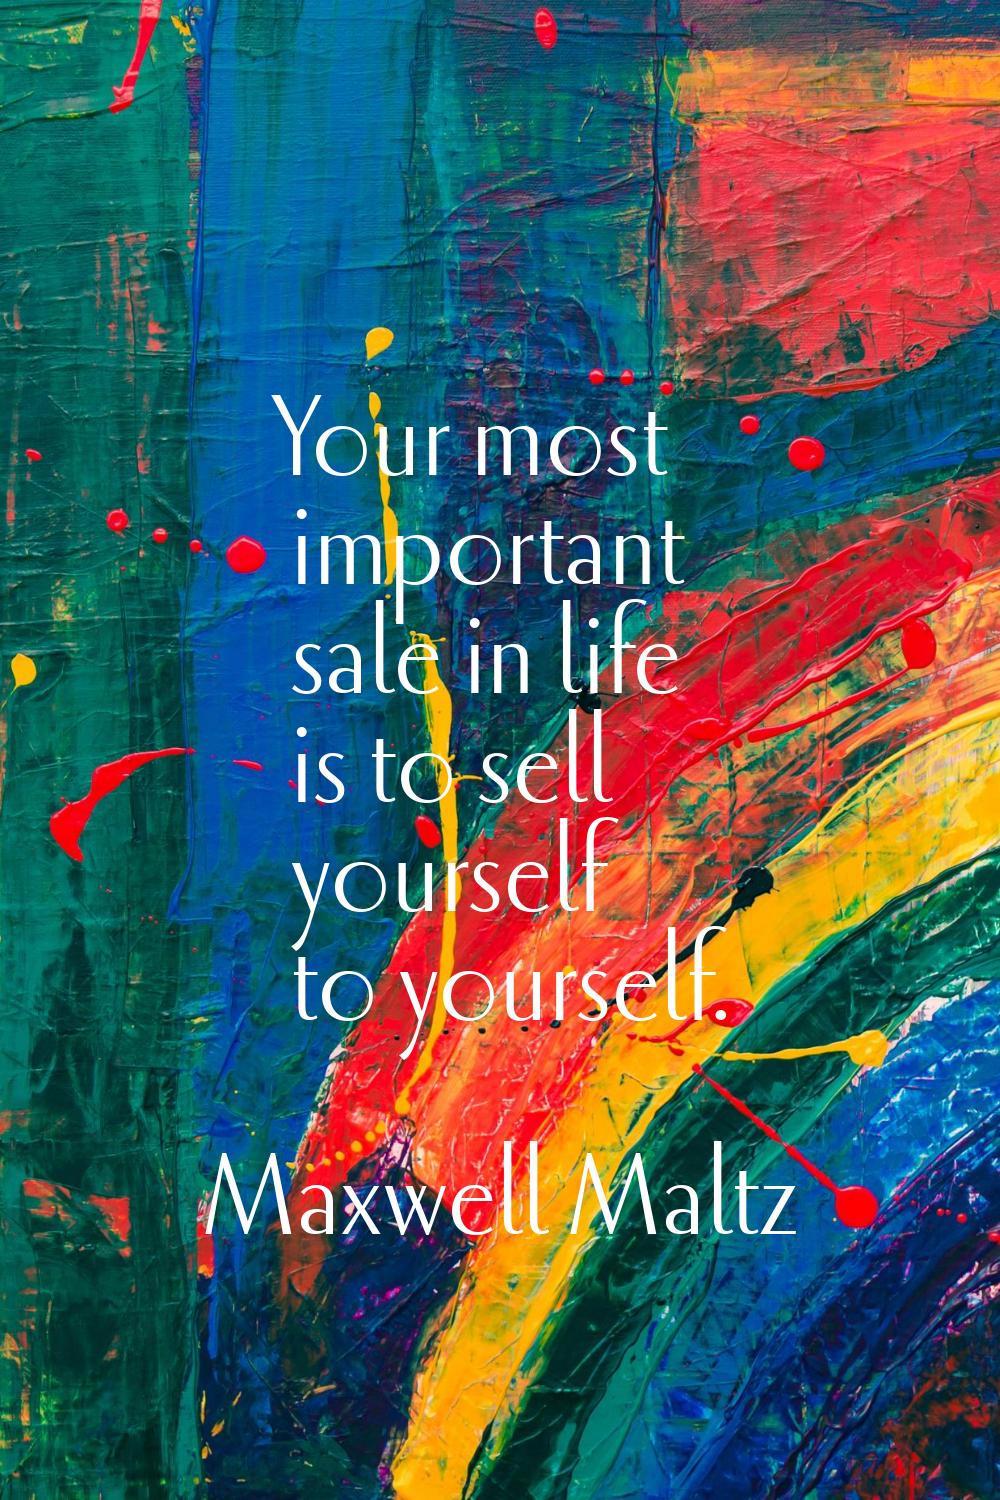 Your most important sale in life is to sell yourself to yourself.